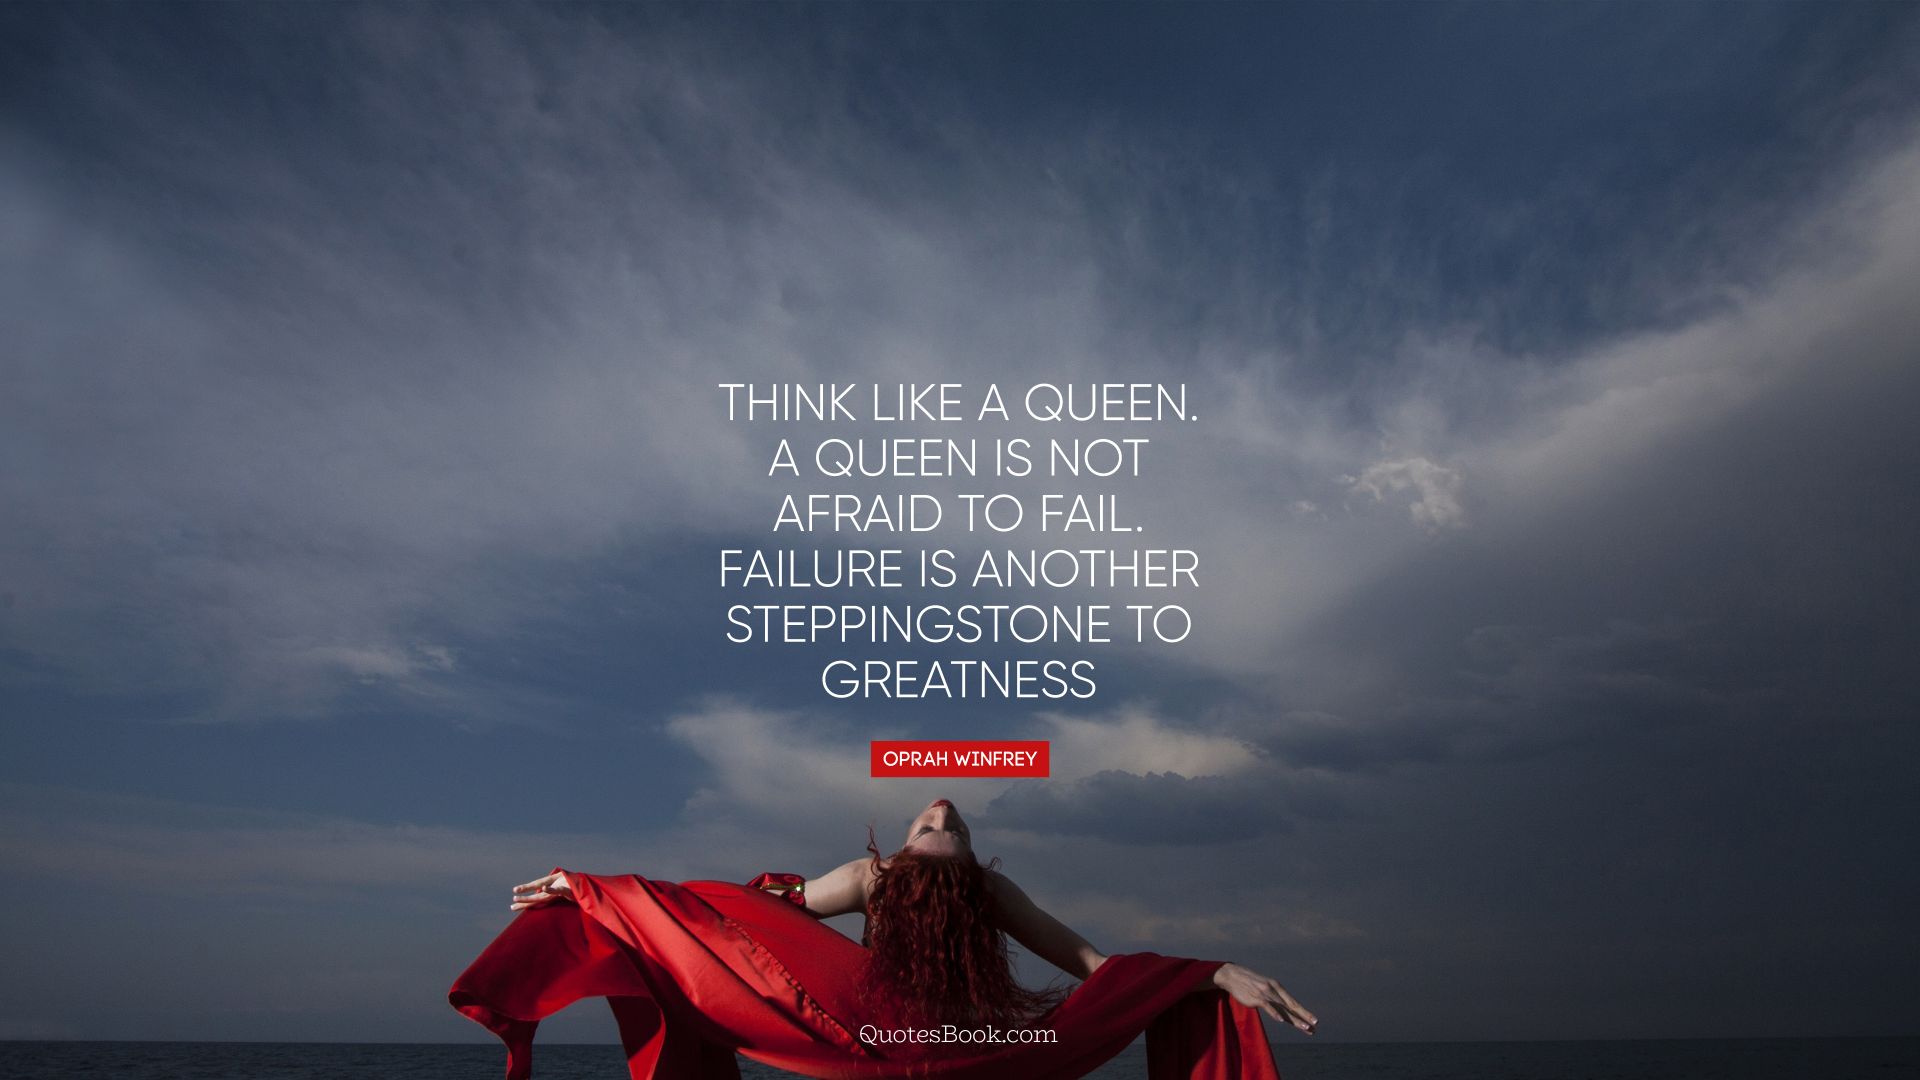 Think like a queen. A queen is not afraid to fail. Failure is another steppingstone to greatness. - Quote by Oprah Winfrey